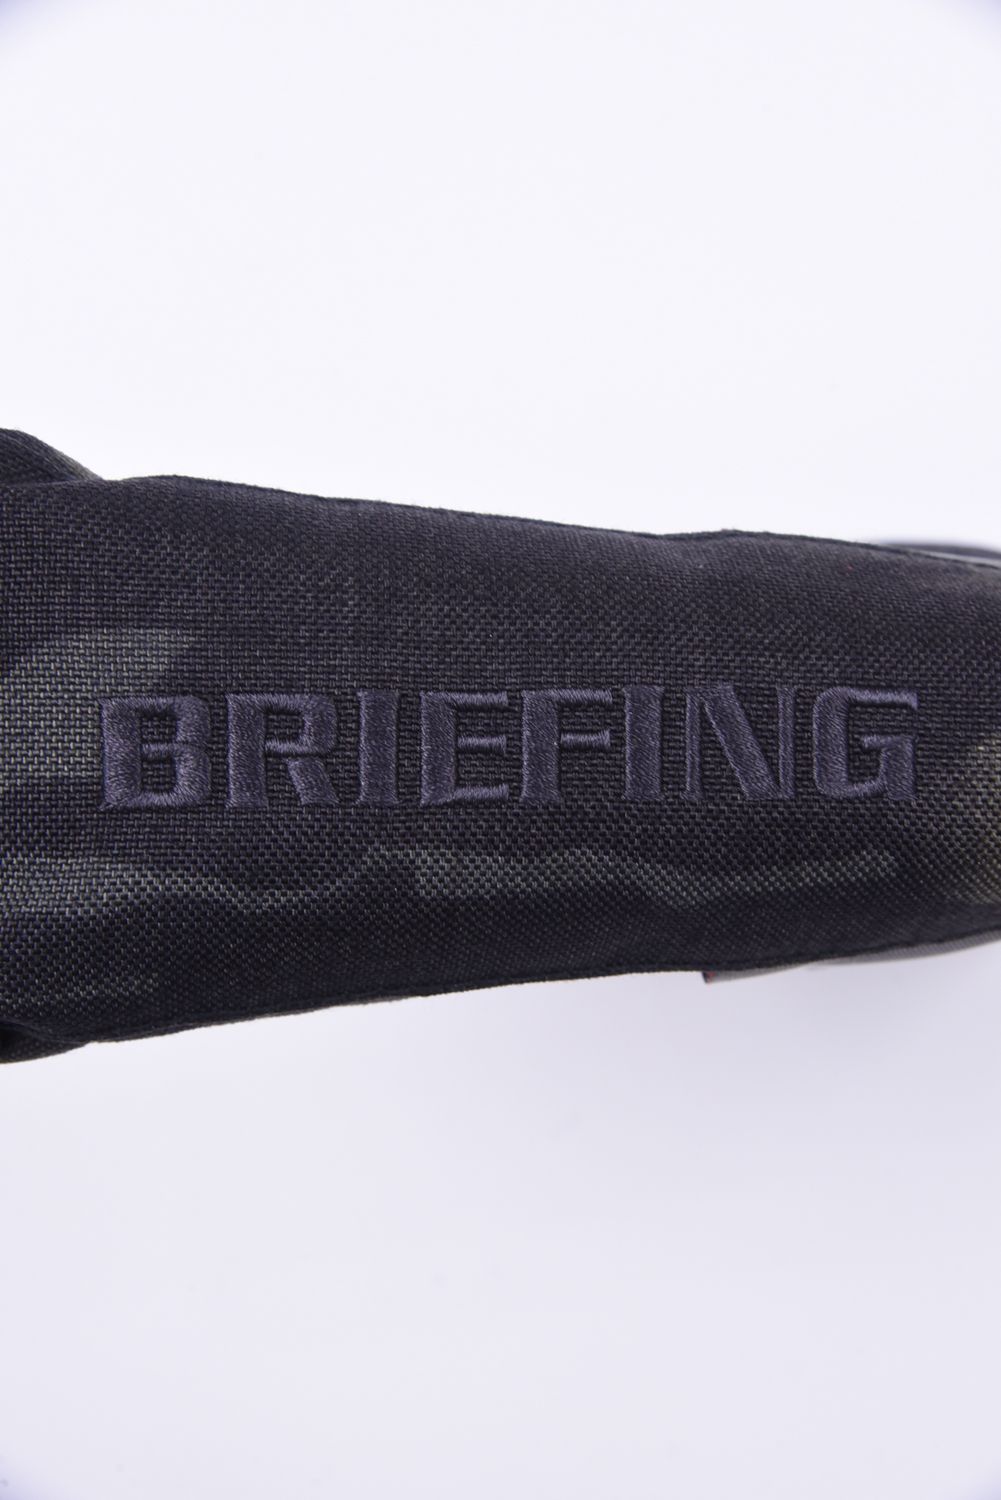 BRIEFING - 【STANDARD SERIES】 PUTTER COVER 1000D / ピンタイプ 